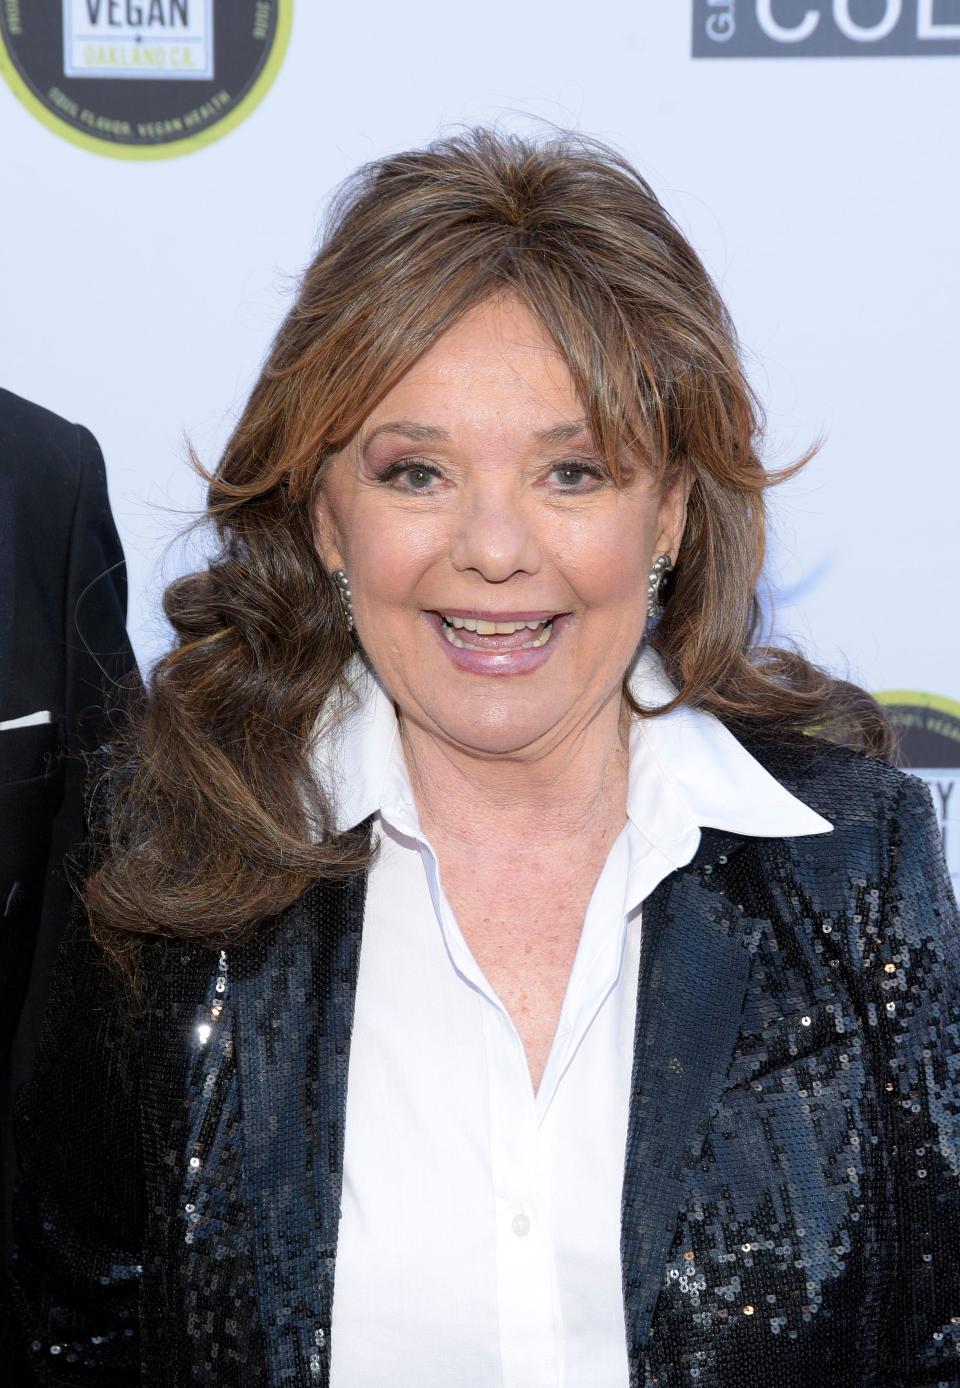 Dawn Wells at an Oscars viewing event on 24 February 2019 in Los Angeles, CaliforniaMichael Tullberg/Getty Images